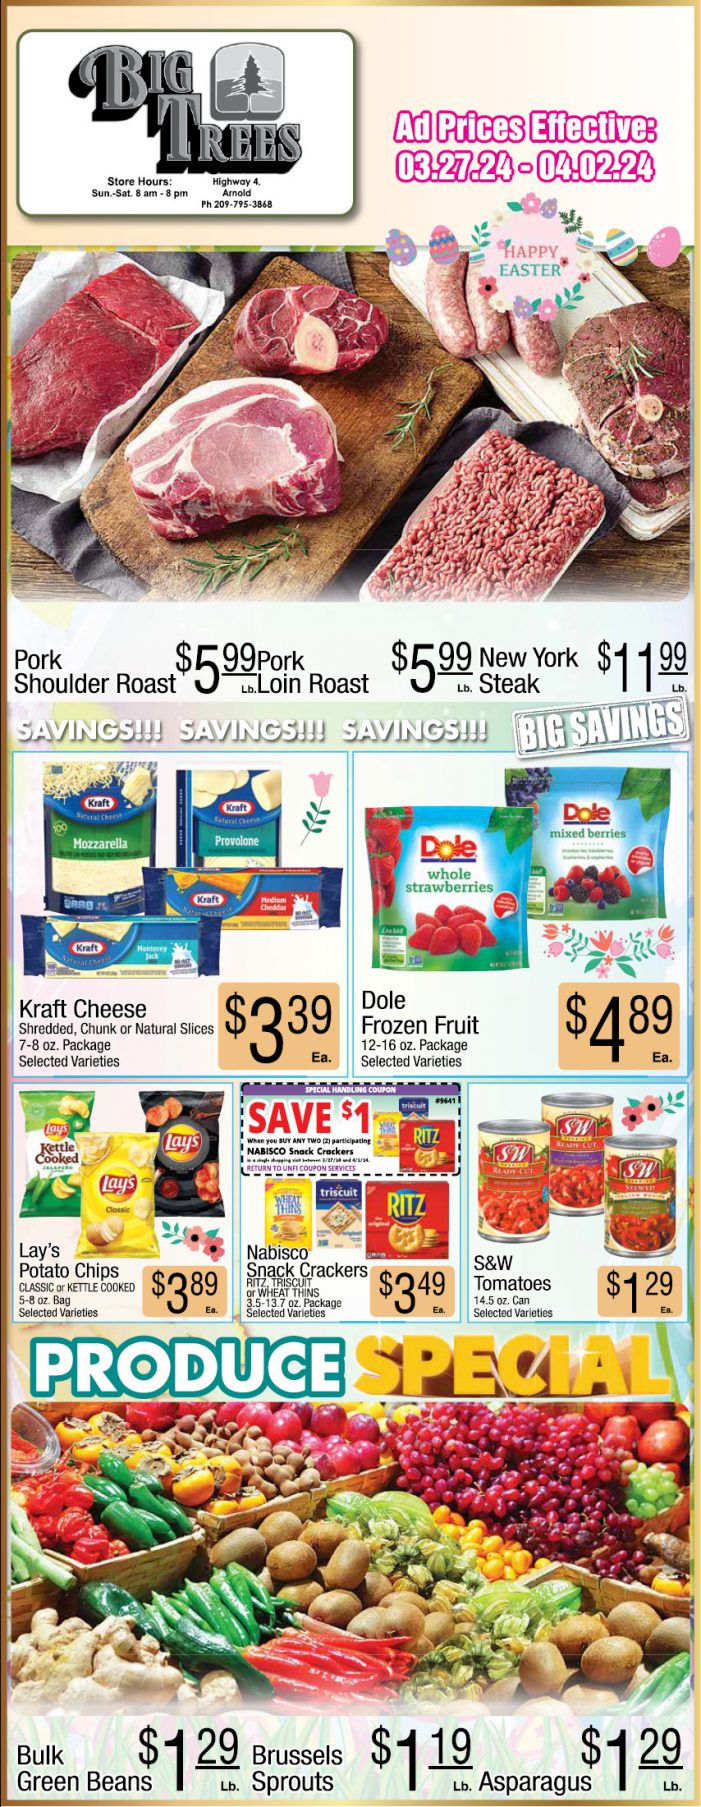 Big Trees Market Weekly Ad, Grocery, Produce, Meat & Deli Specials Through April 2nd! Shop Local & Save!